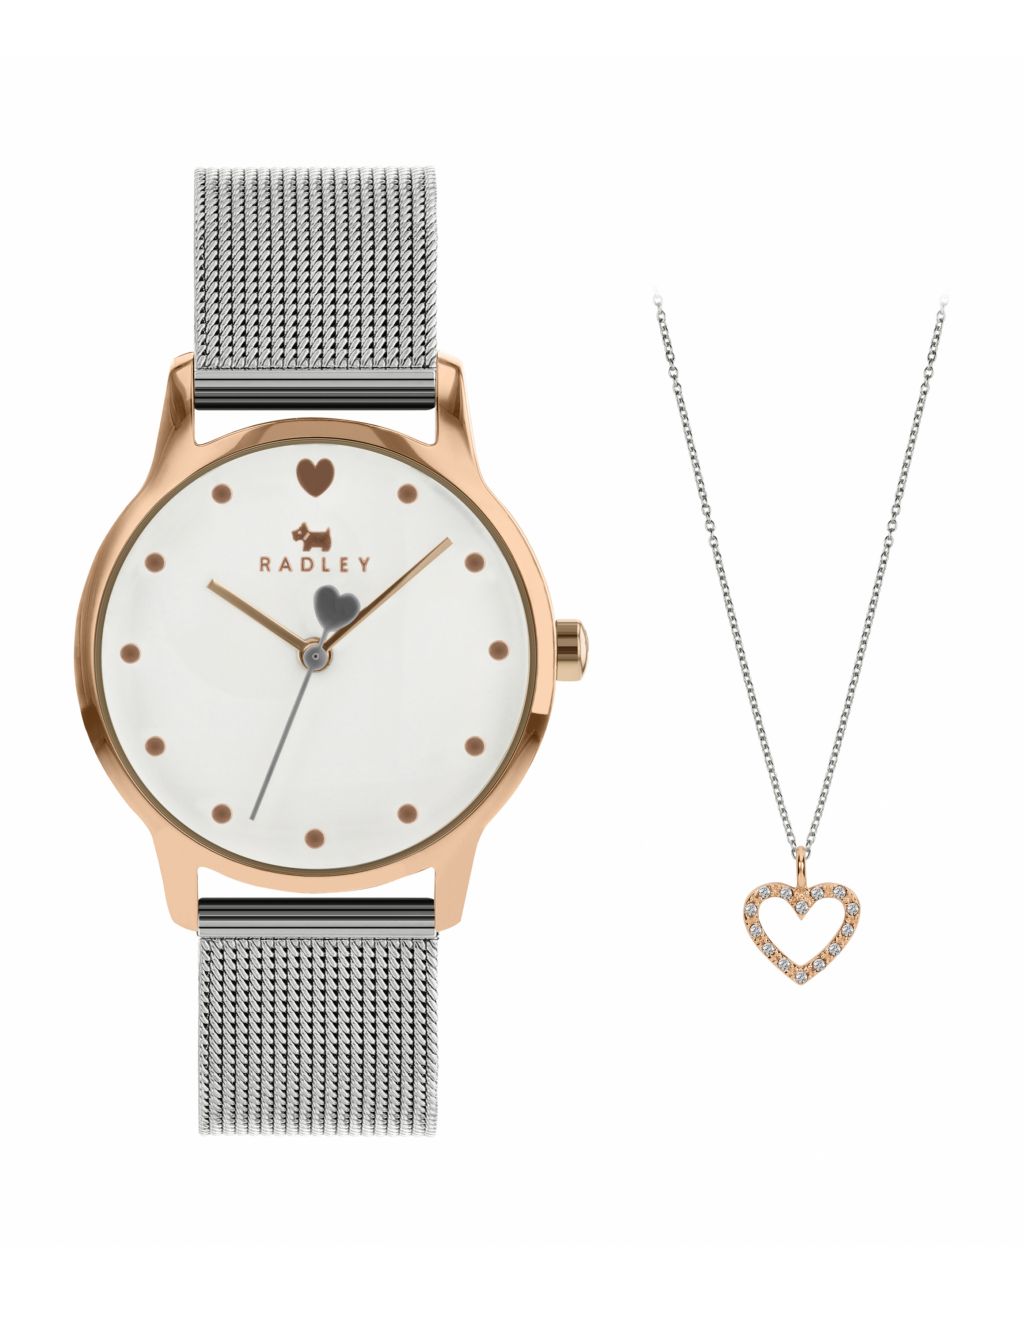 Radley Stainless Steel Watch & Necklace Gift Set image 1